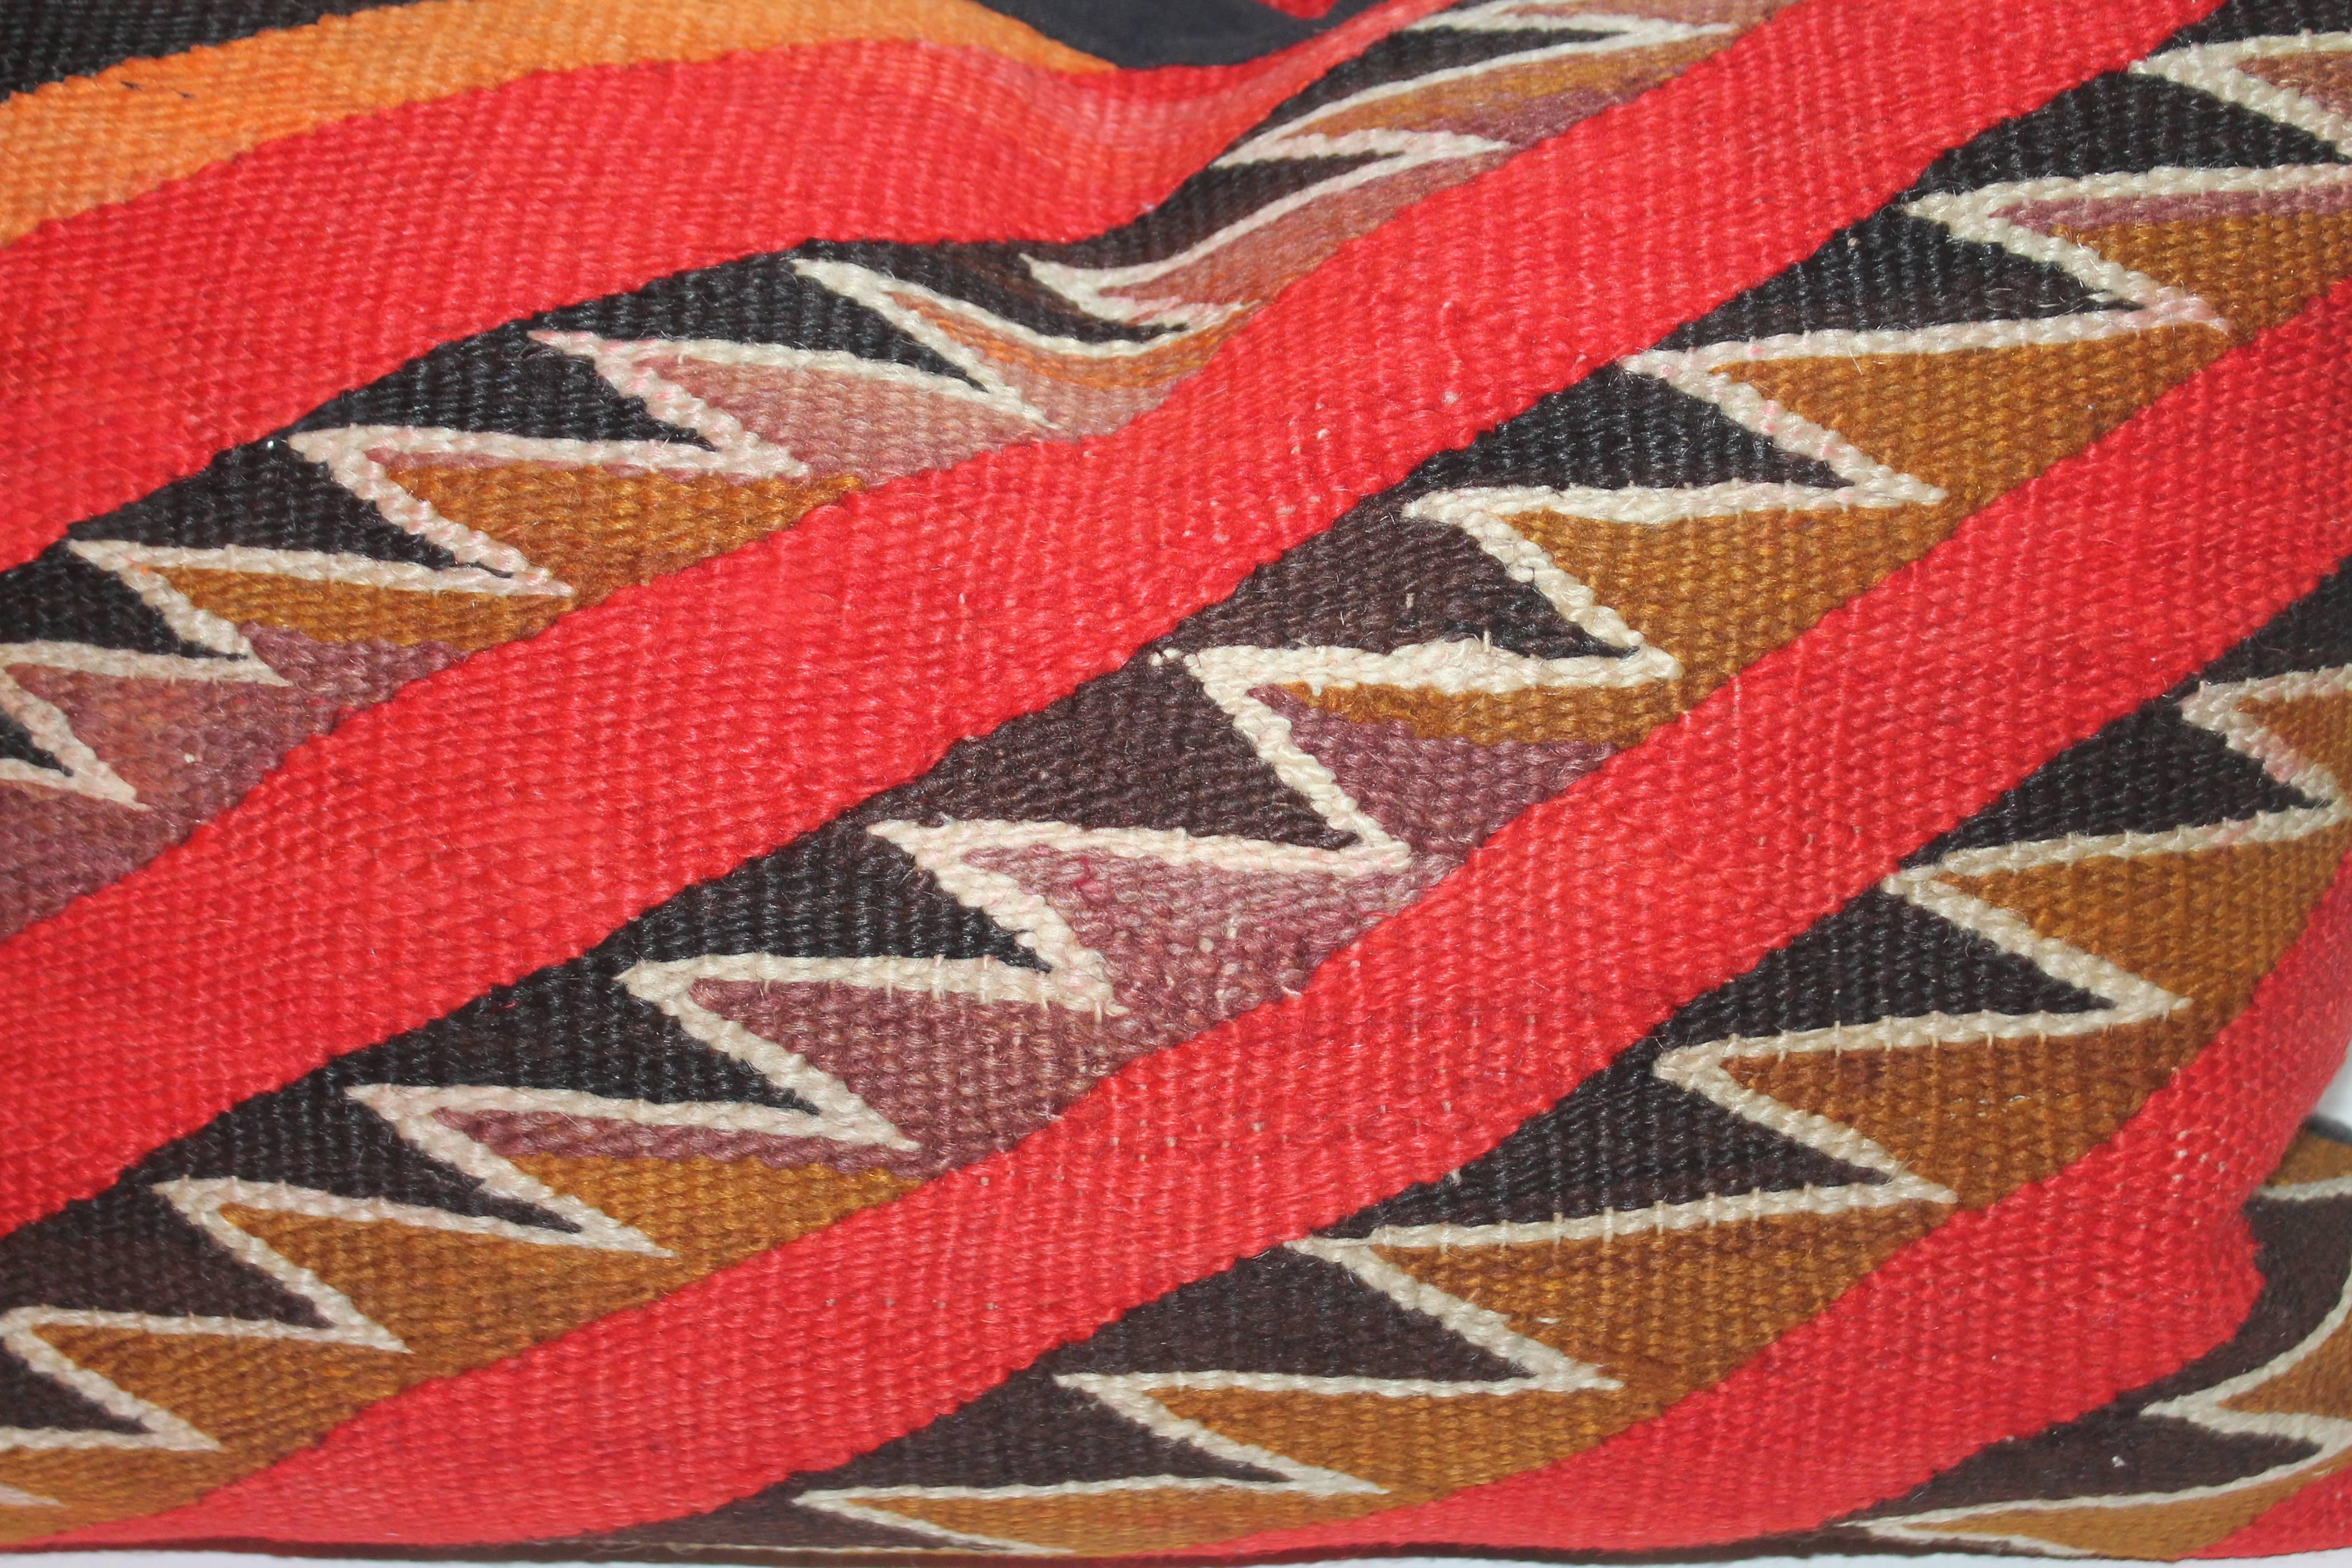 These early and rare Navajo weaving bolster pillows are in amazing as found condition with lazy lines and great rare colors. The backing is in black cotton linen fabric. The inserts are down and feather fill.